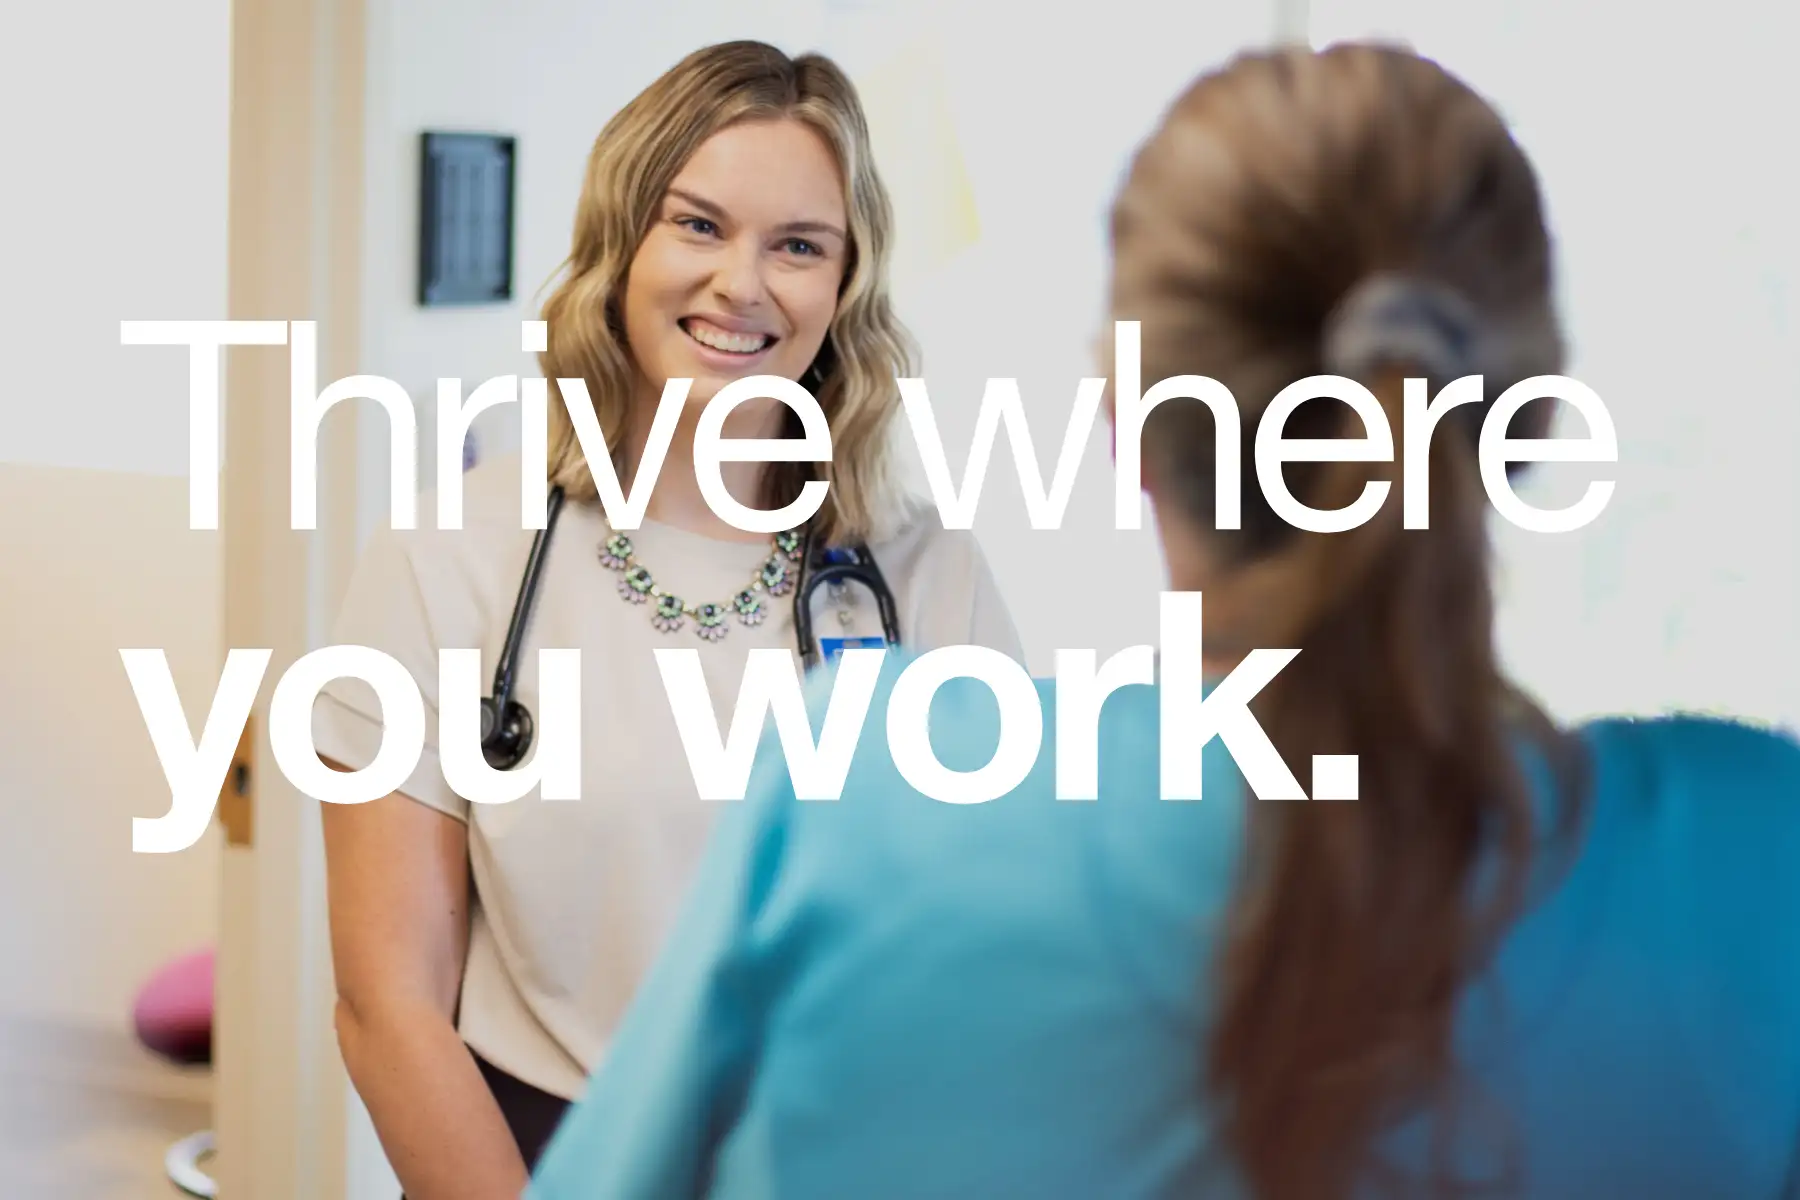 Image of St. Luke's provider with patient, with overlay of "Thrive where you work."